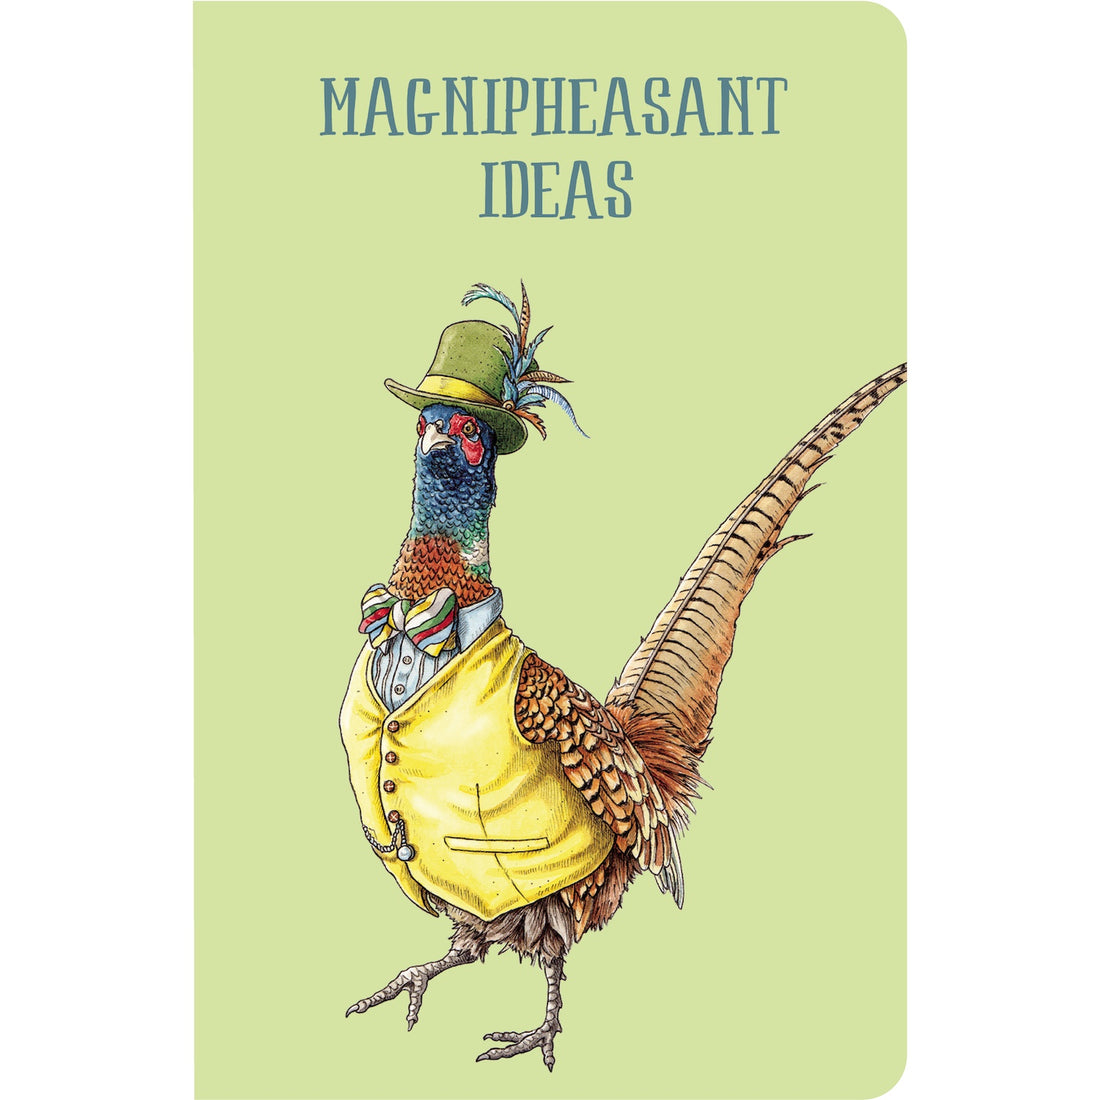 The front cover of the Magnipheasant Ideas Notebook is light green with a whimsical illustration of a bird with a long tail wearing a yellow vest, a colorful bow tie, and a green top hat, with the caption &quot;Magnipheasant Ideas&quot; across the top of the notebook in blue.